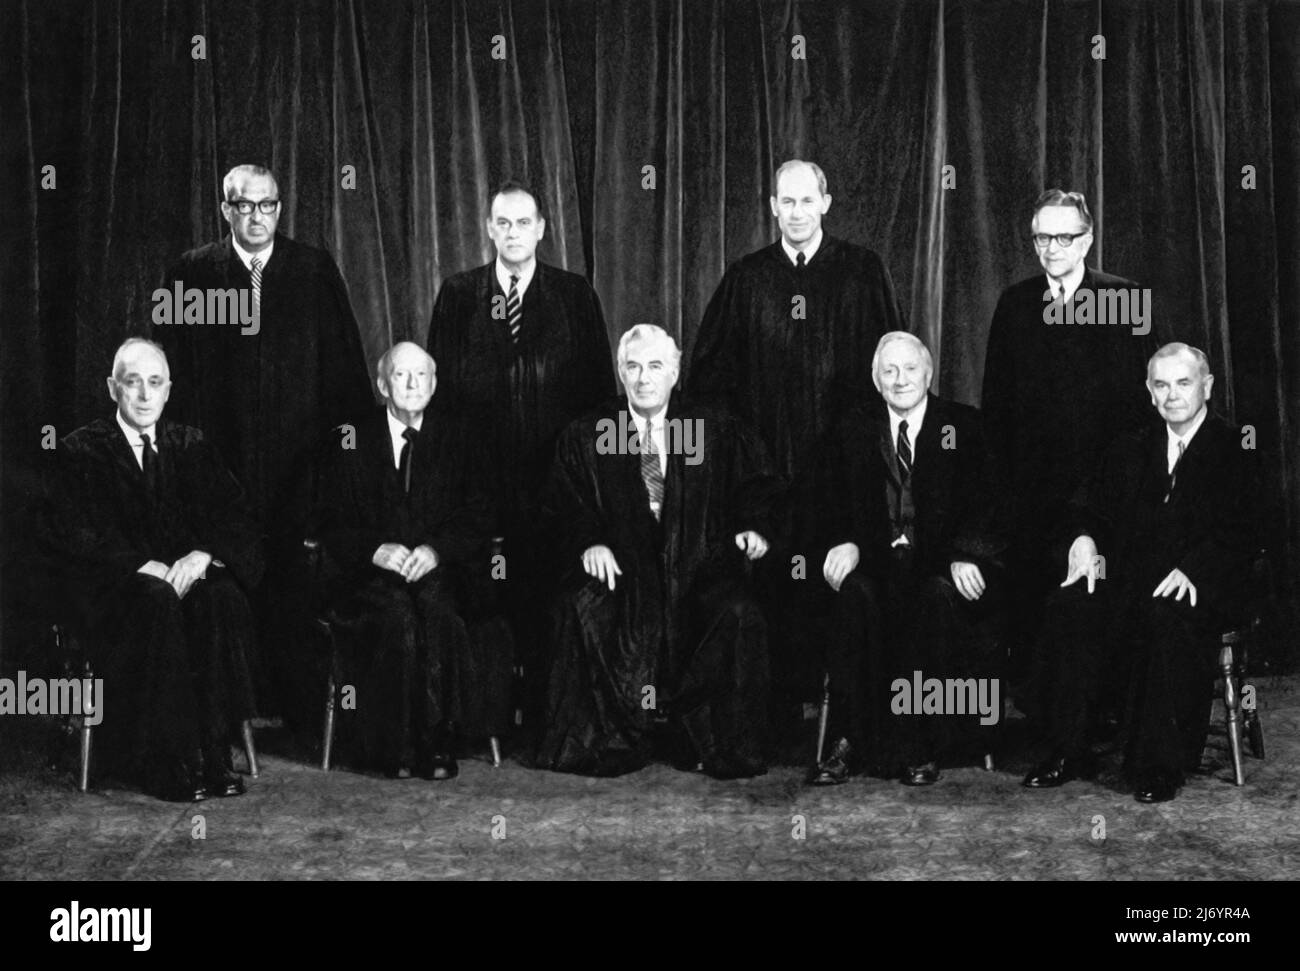 U.S. Supreme Court official group portrait on January 23, 1971. This court would later hear the initial argument in the Roe vs. Wade abortion case on December 13, 1971. The case was reargued October 11, 1972 with retired Justices Black and Harlan being replaced by Justices Powell and Rehnquist. Row vs. Wade was decided on January 22, 1973. Stock Photo